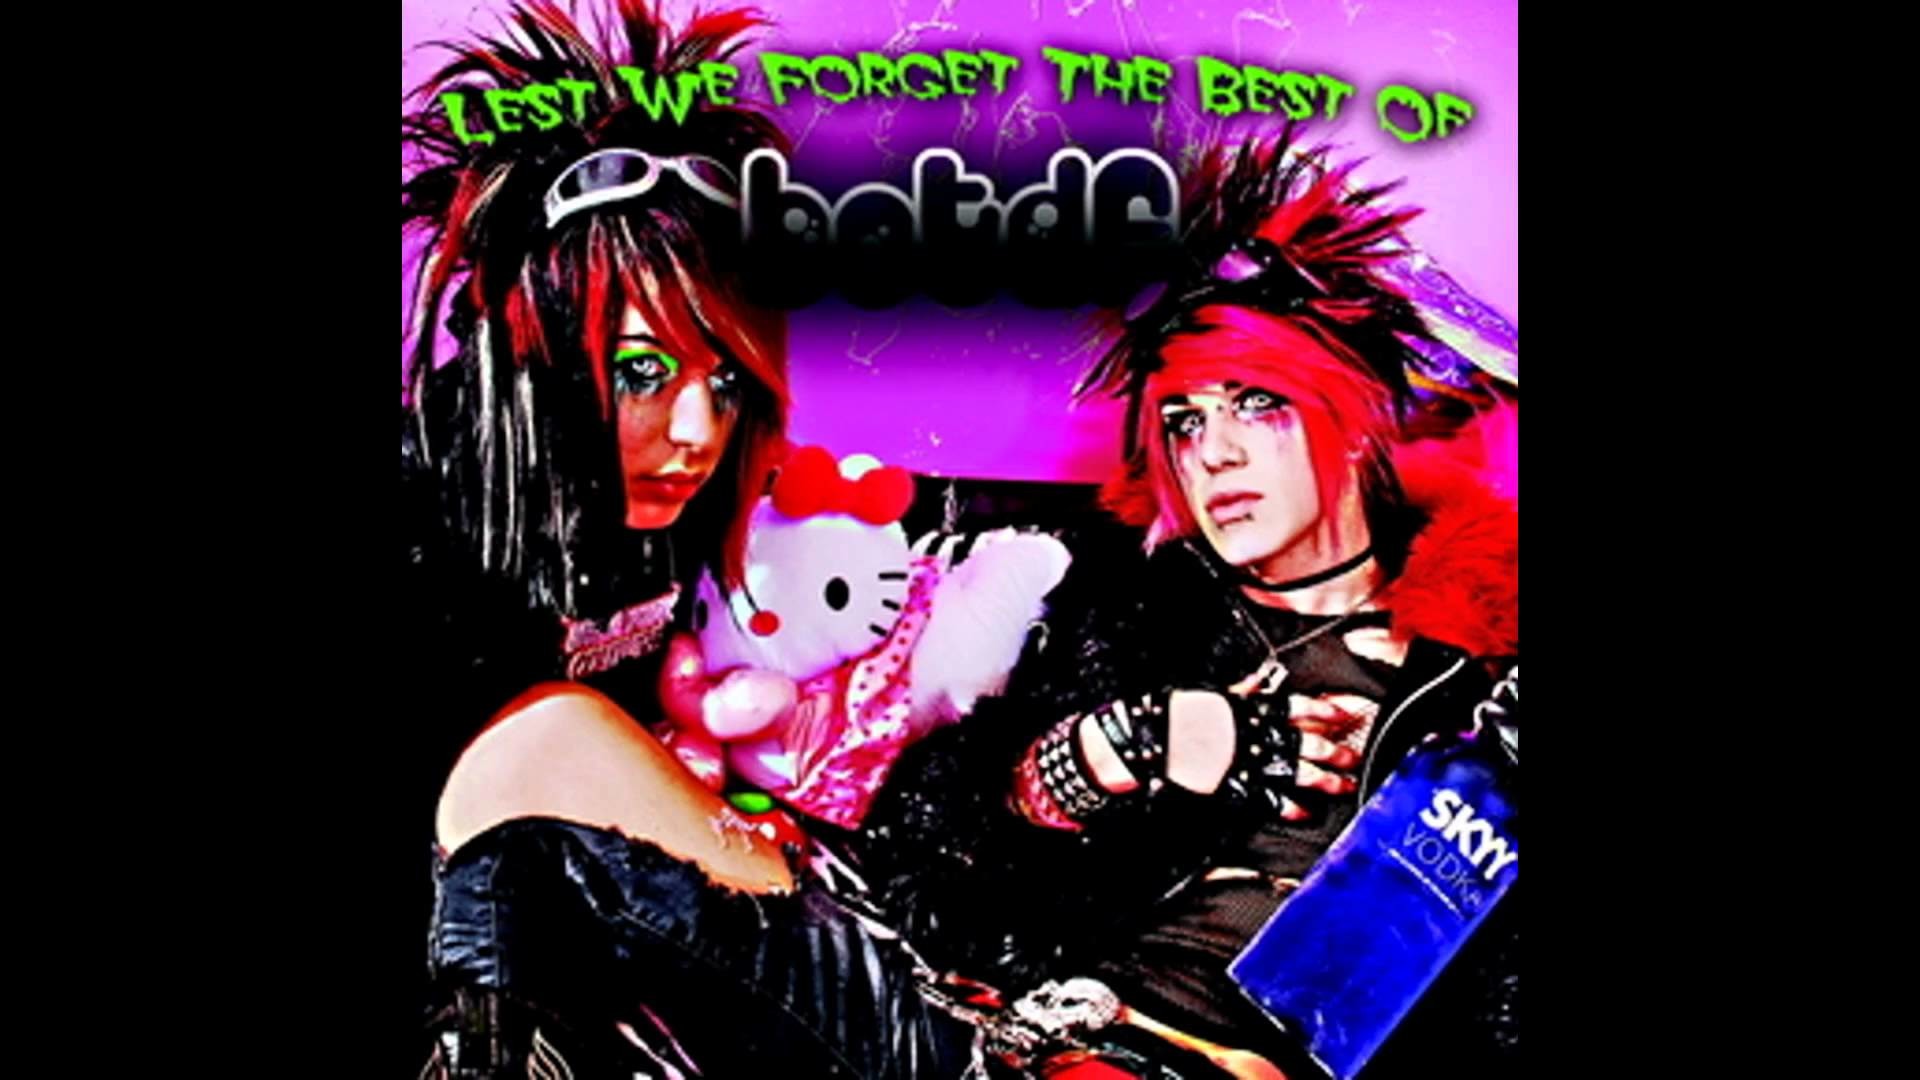 1920x1080 Blood On the Dance Floor - Lest We Forget The Best Of BOTDF (Full Length) -  YouTube